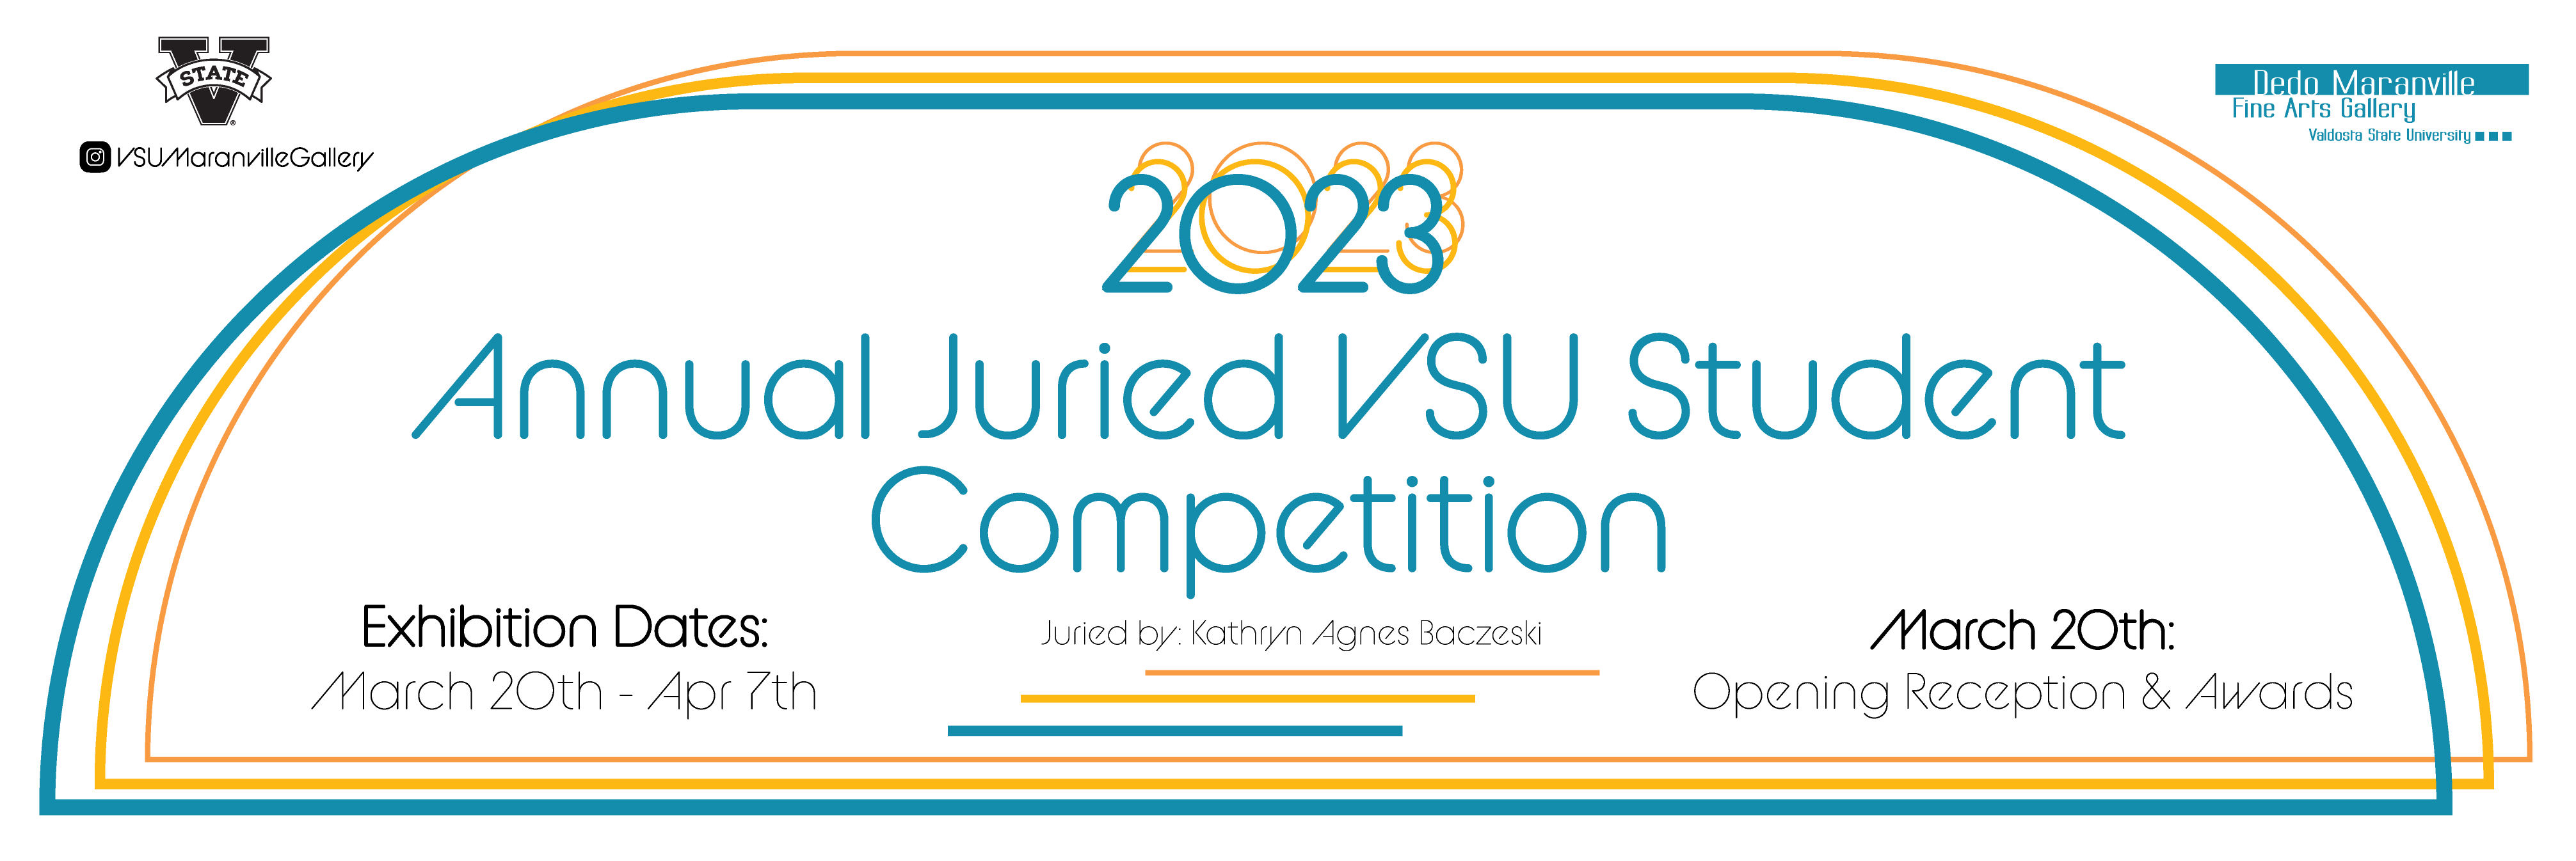 2023 Annual Juried VSU Student Competition